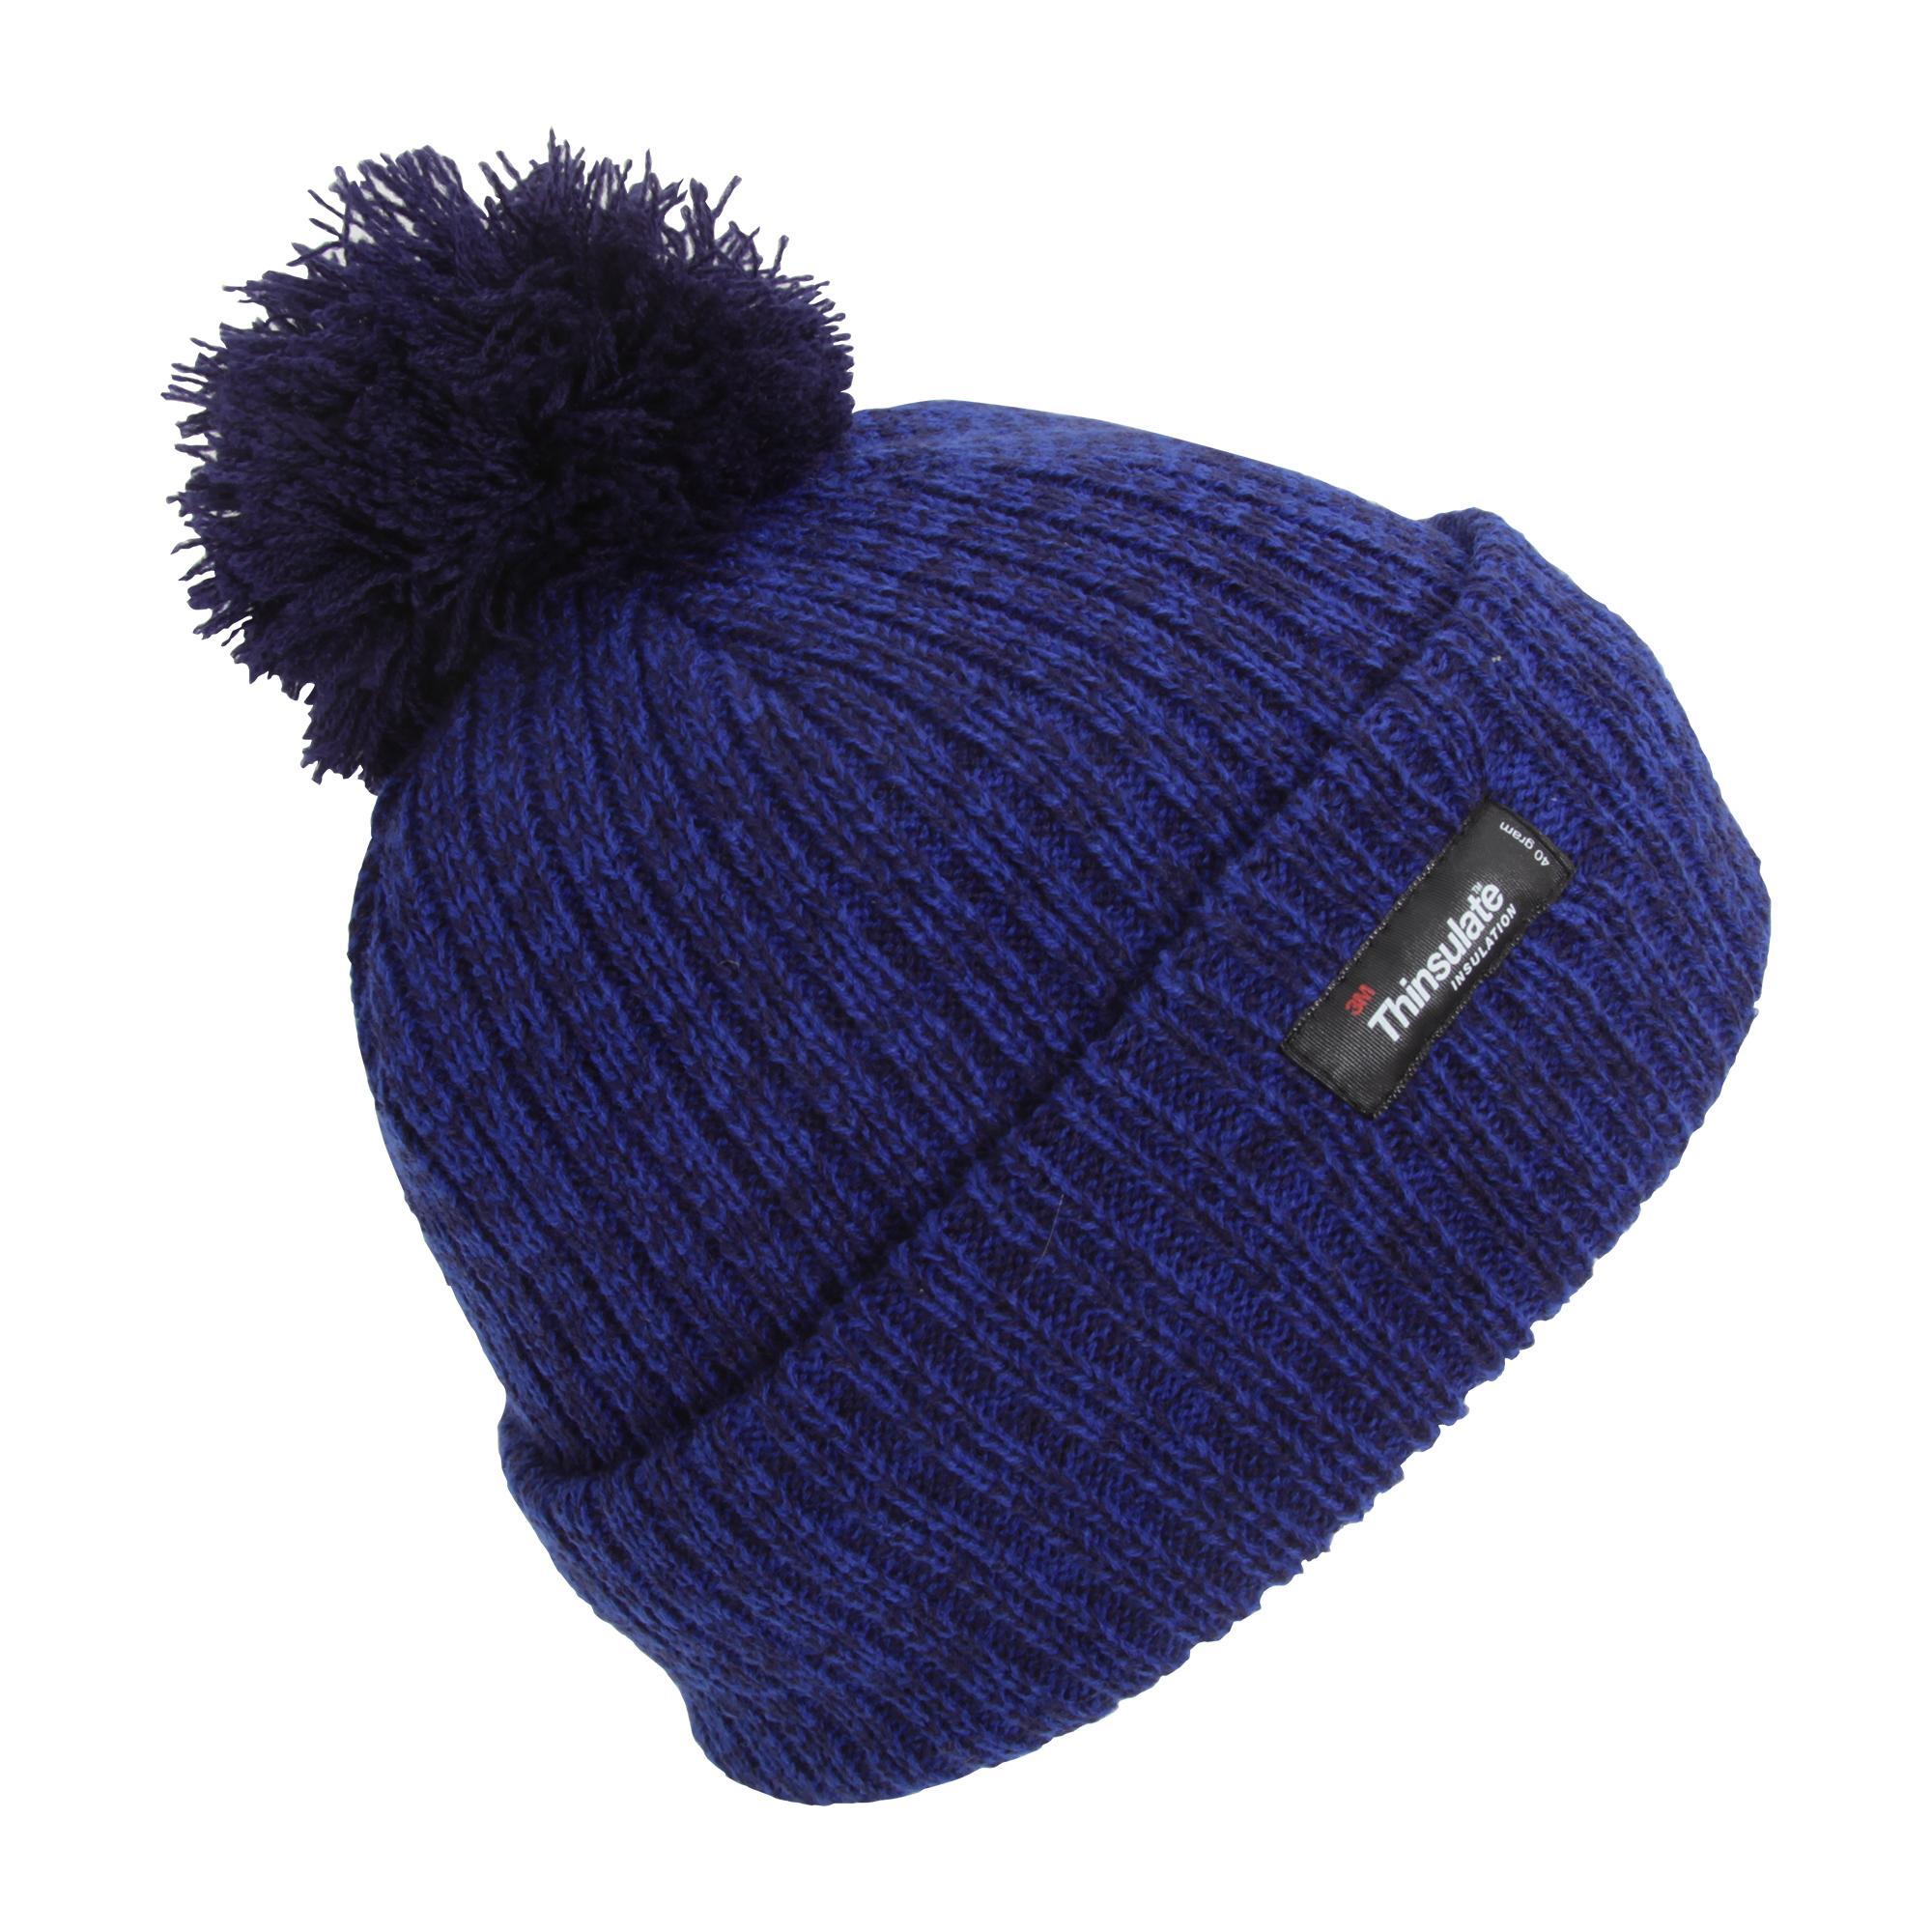 Childrens Thinsulate Knitted Winter Beanie Hat With Pom Pom (Blue Marl) (One Size)